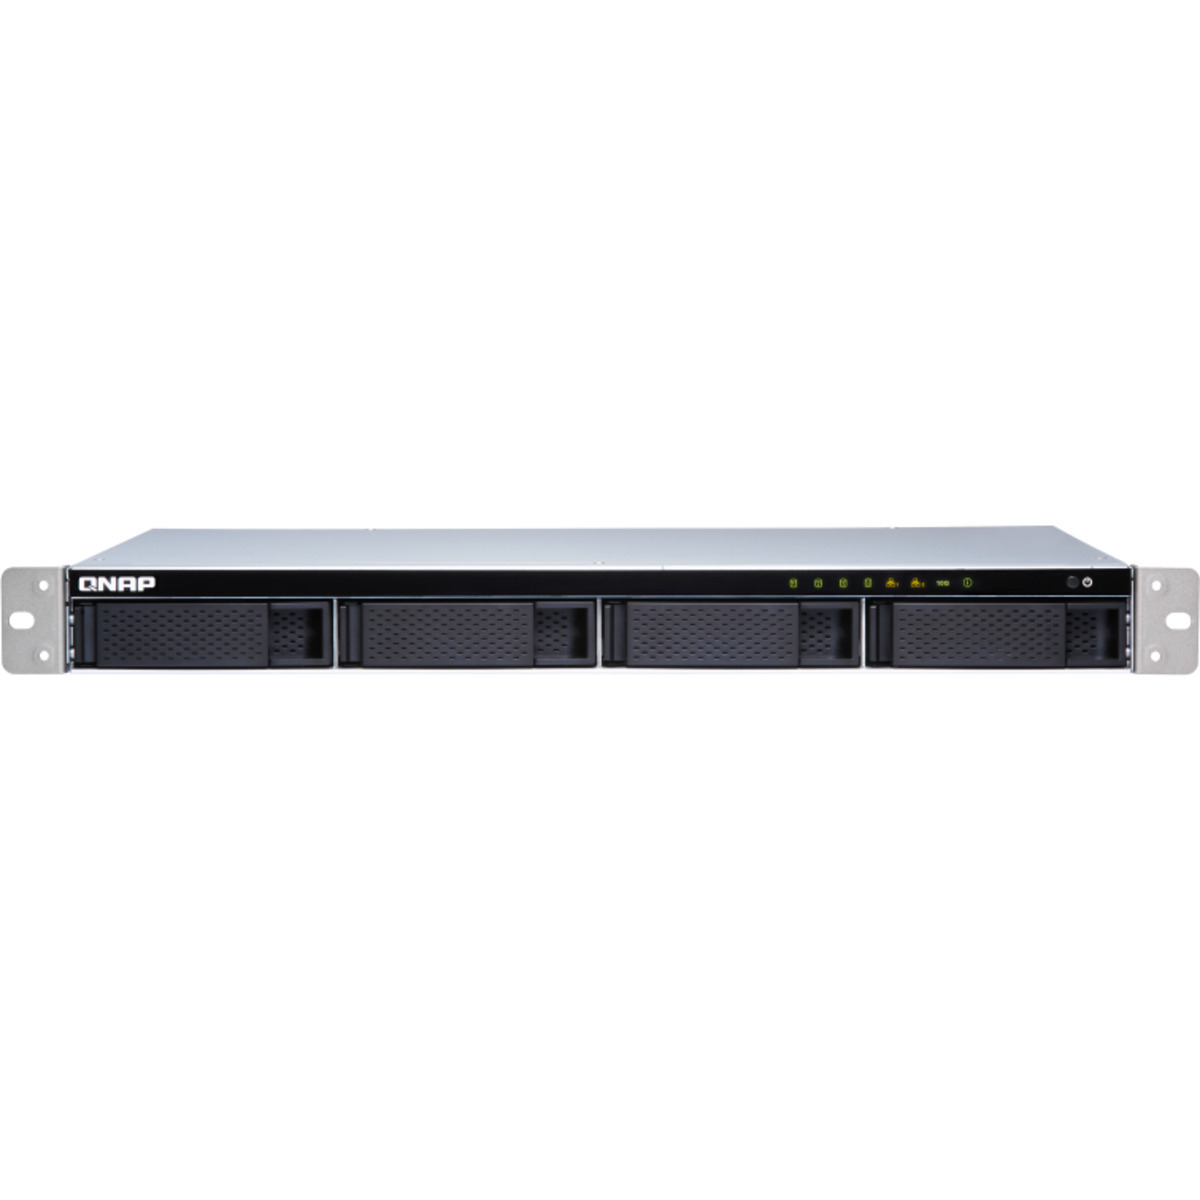 QNAP TS-431XeU 54tb 4-Bay RackMount Multimedia / Power User / Business NAS - Network Attached Storage Device 3x18tb Seagate IronWolf Pro ST18000NT001 3.5 7200rpm SATA 6Gb/s HDD NAS Class Drives Installed - Burn-In Tested - FREE RAM UPGRADE TS-431XeU